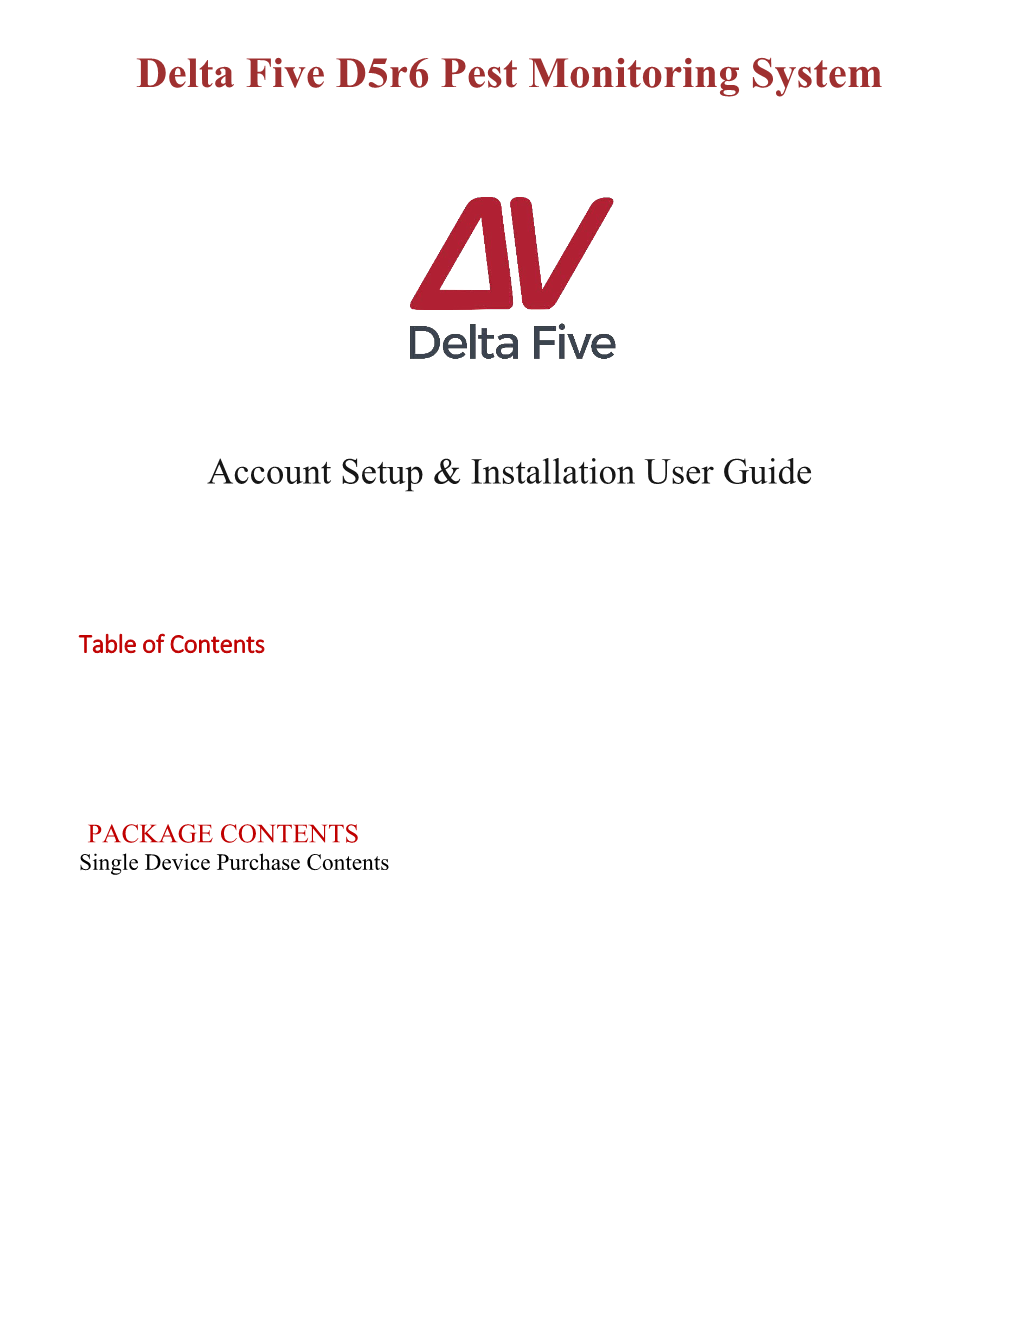 Delta Five D5r6 Account Setup & Installation Guide Updated 2.26.18